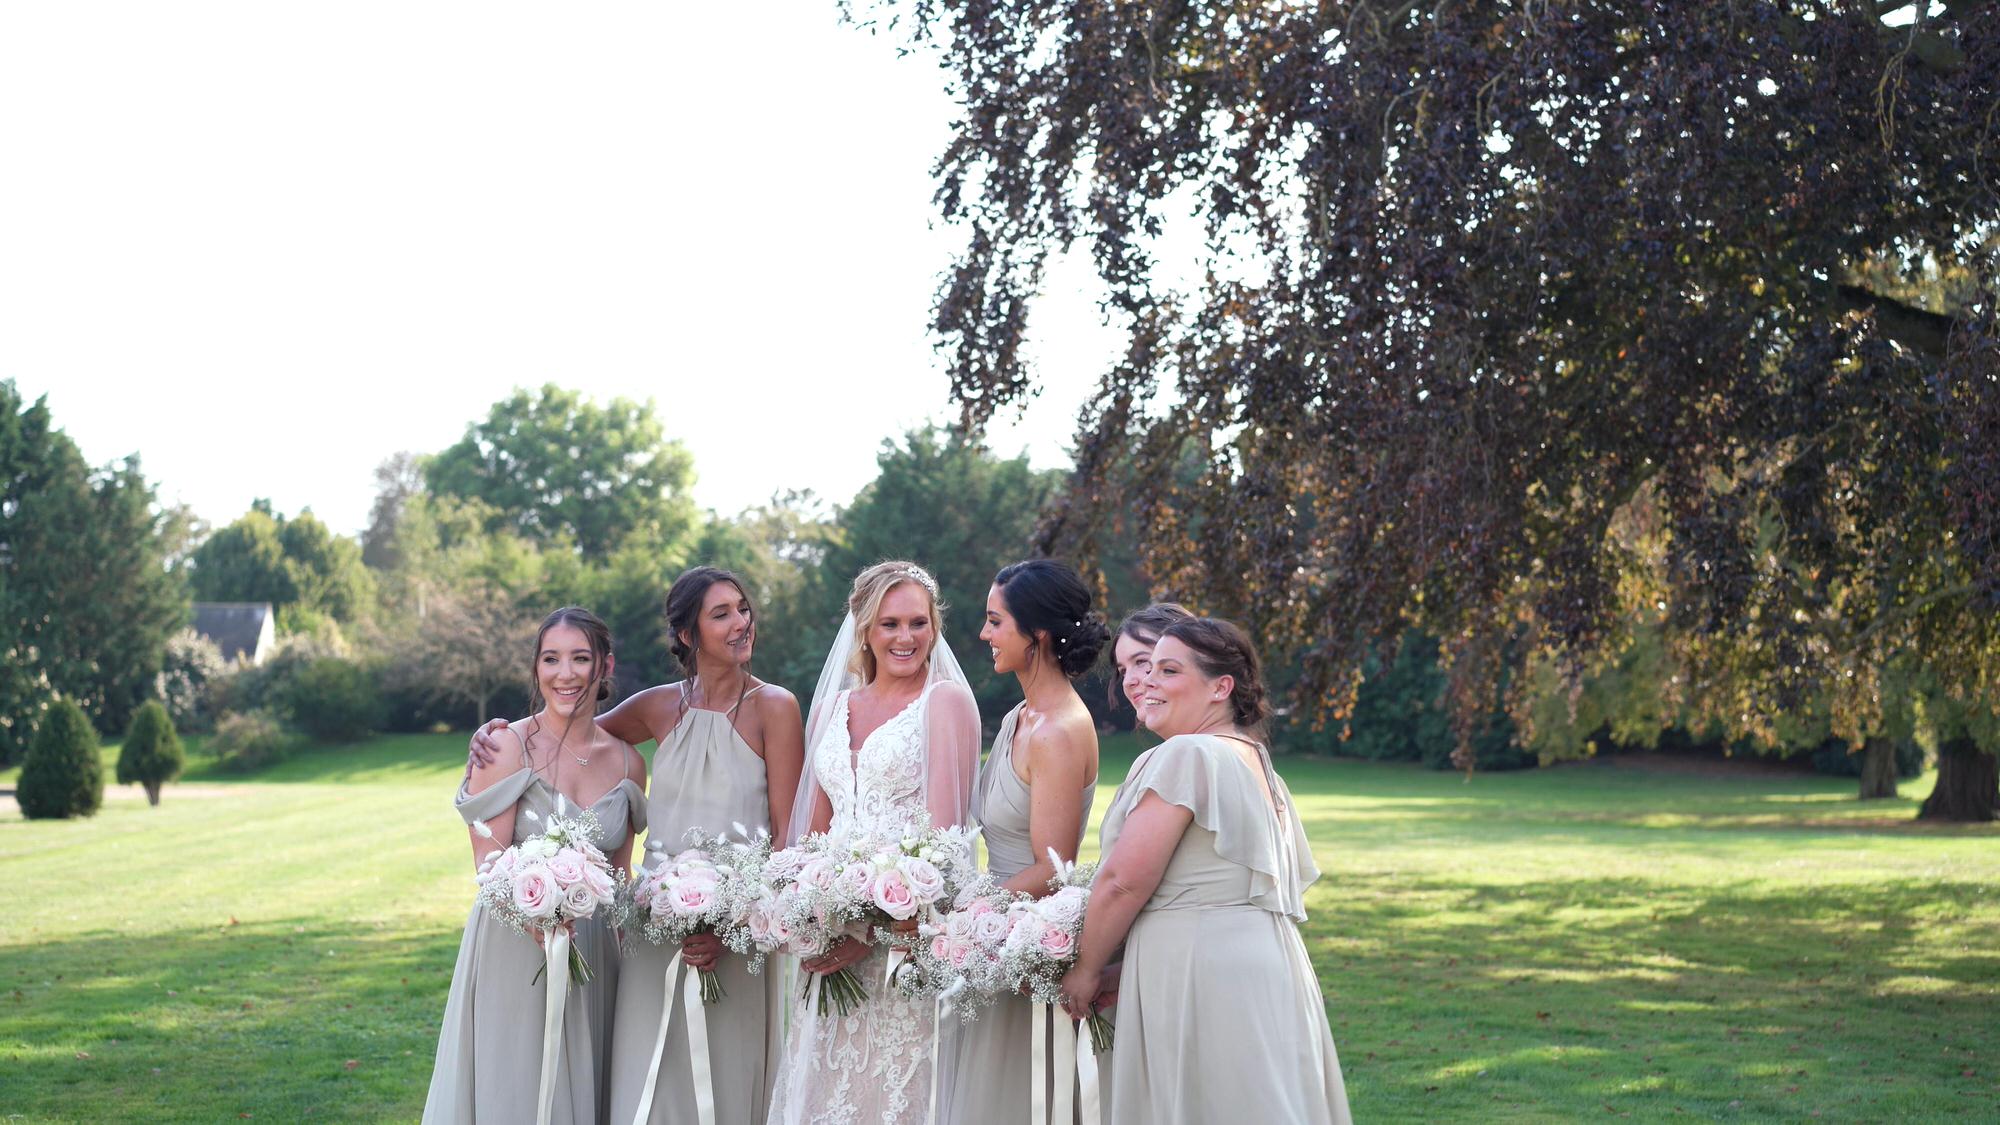 a video still of the bride posing with her bridesmaids